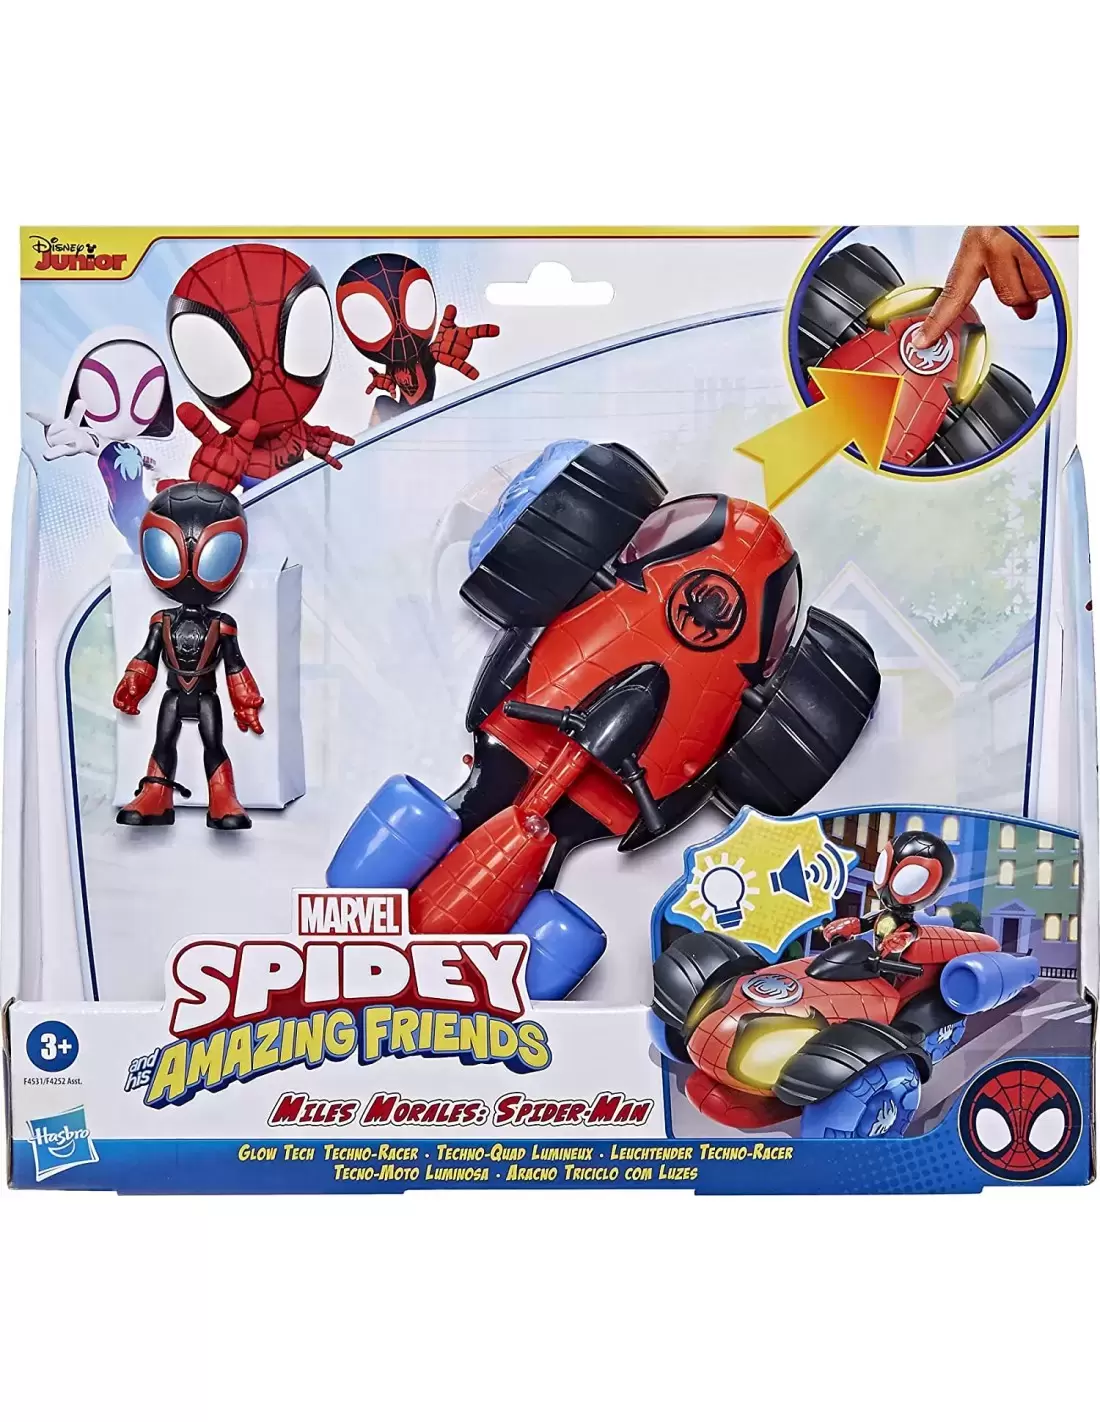 Spidey And His Amazing Friends - Glow Tech Techno Racer - Miles Morales